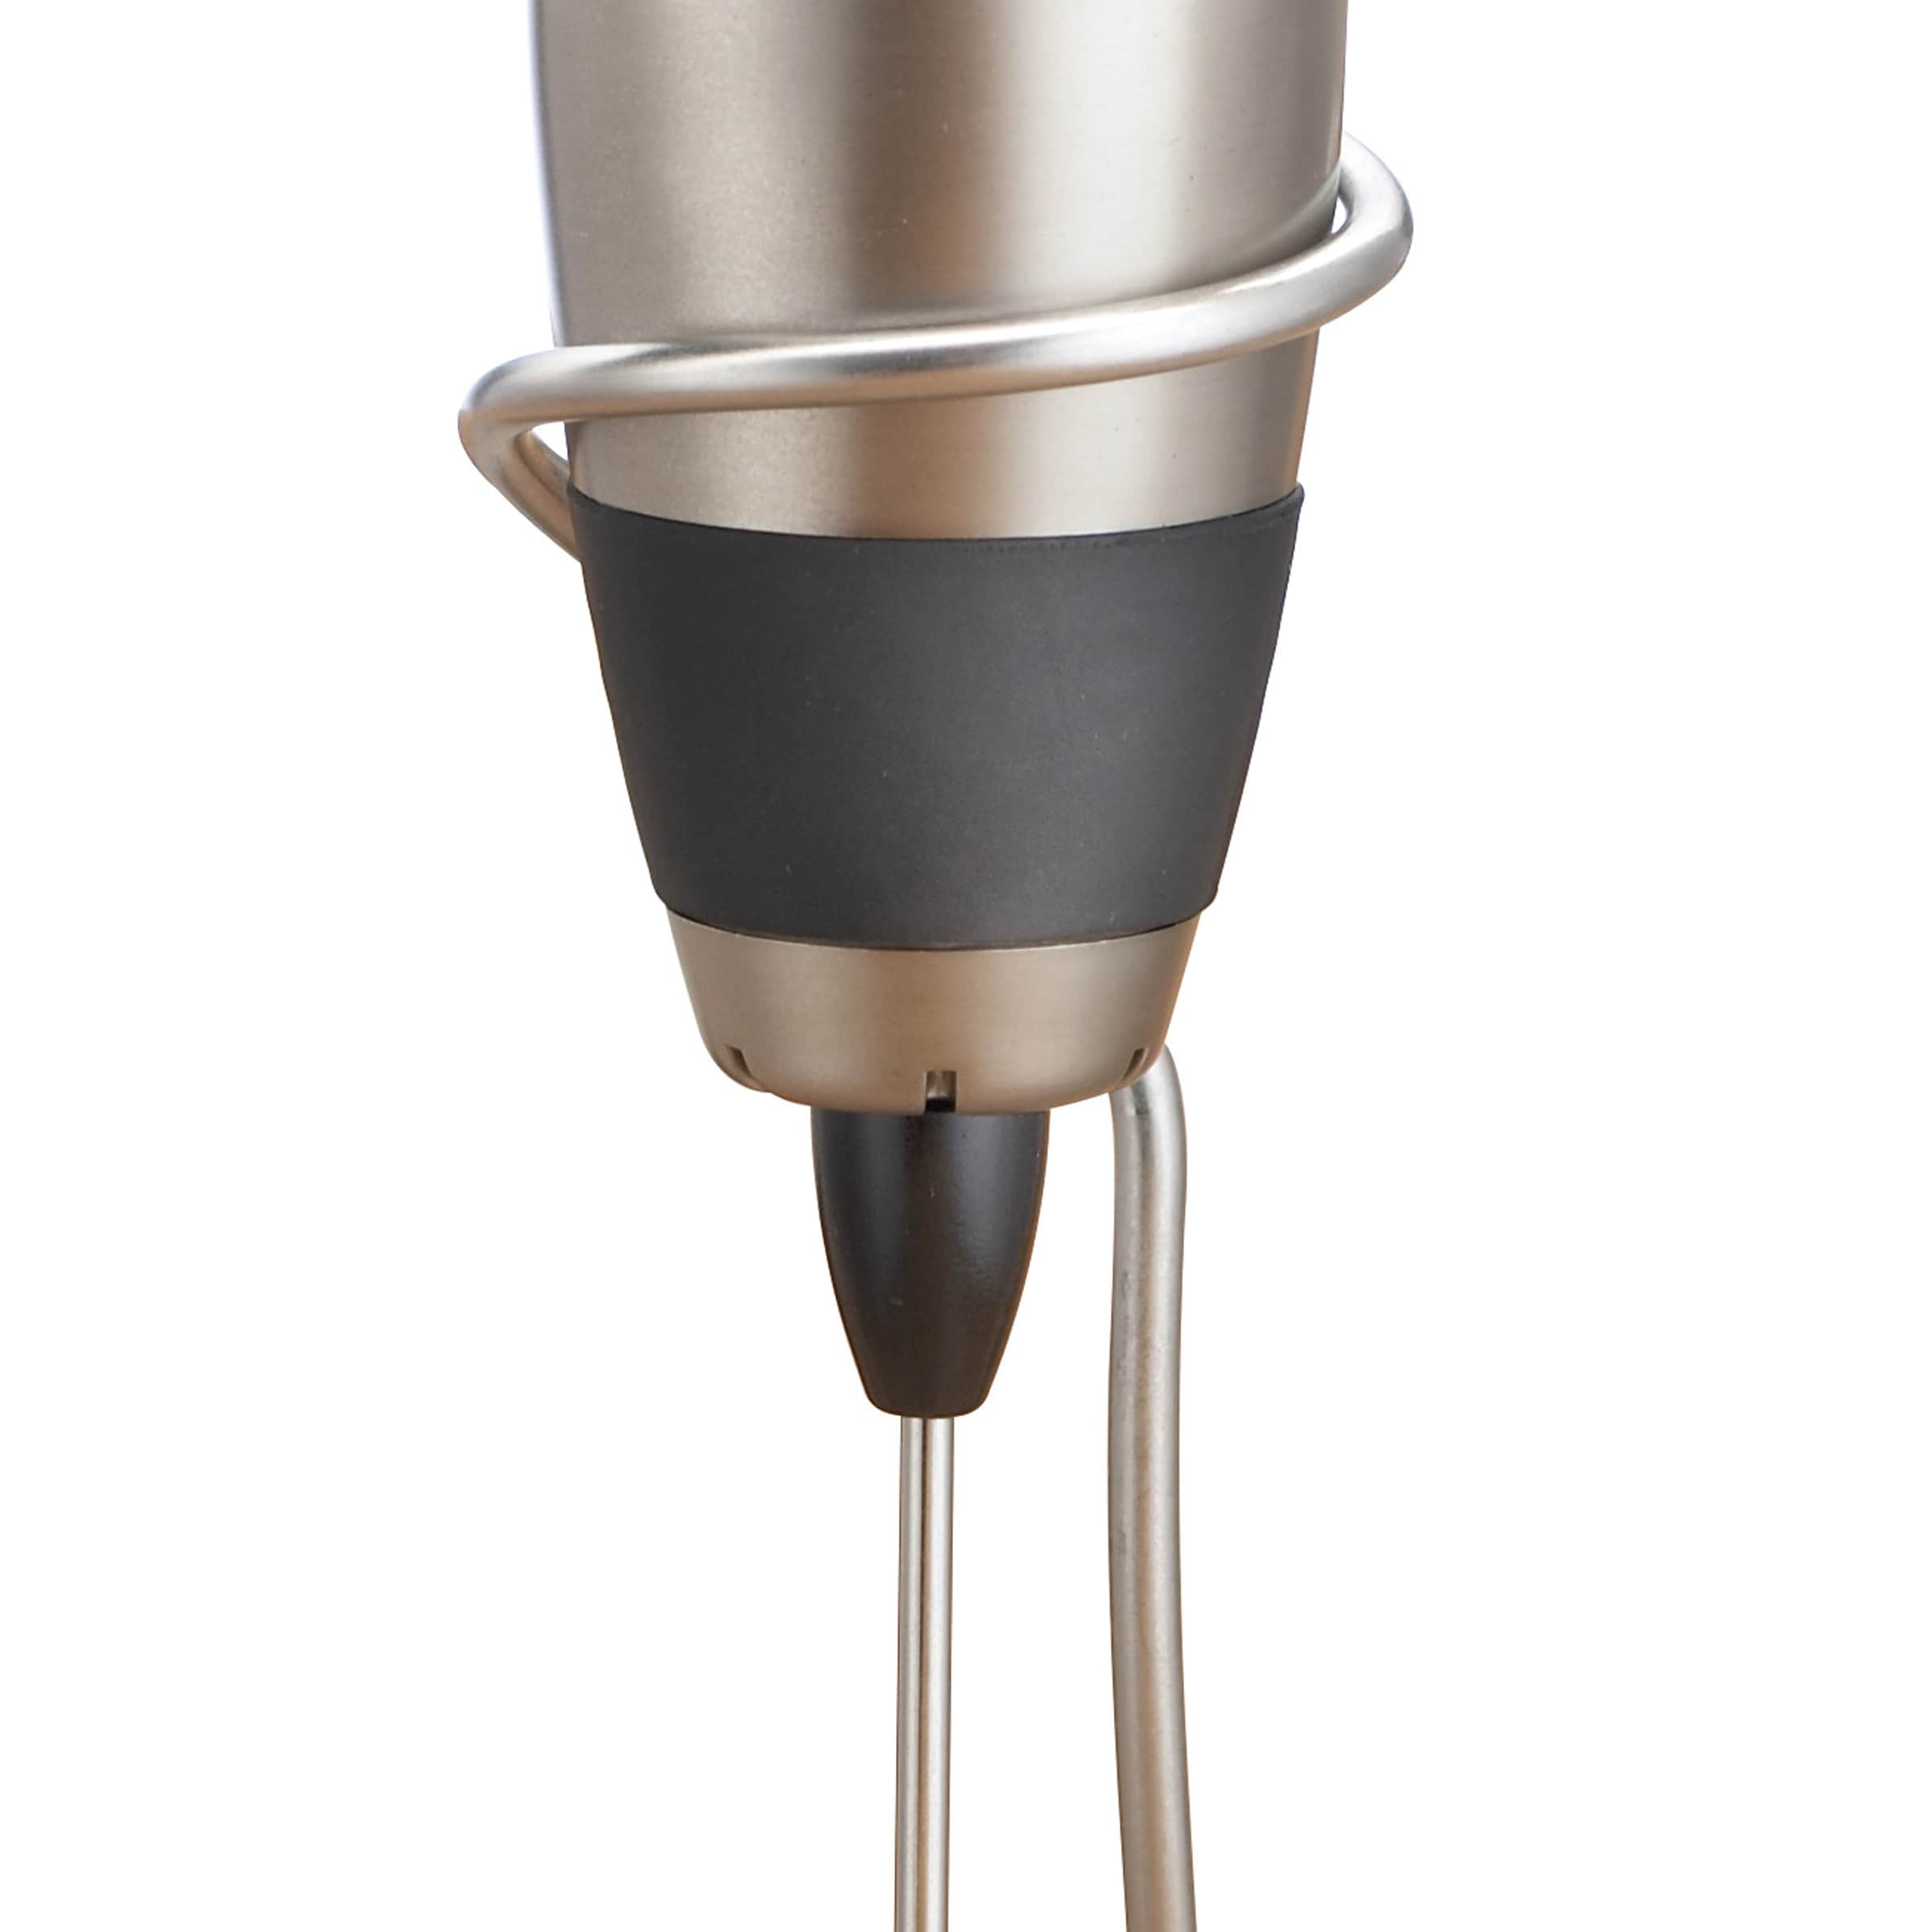 Knox Gear Handheld Milk Frother - Silver